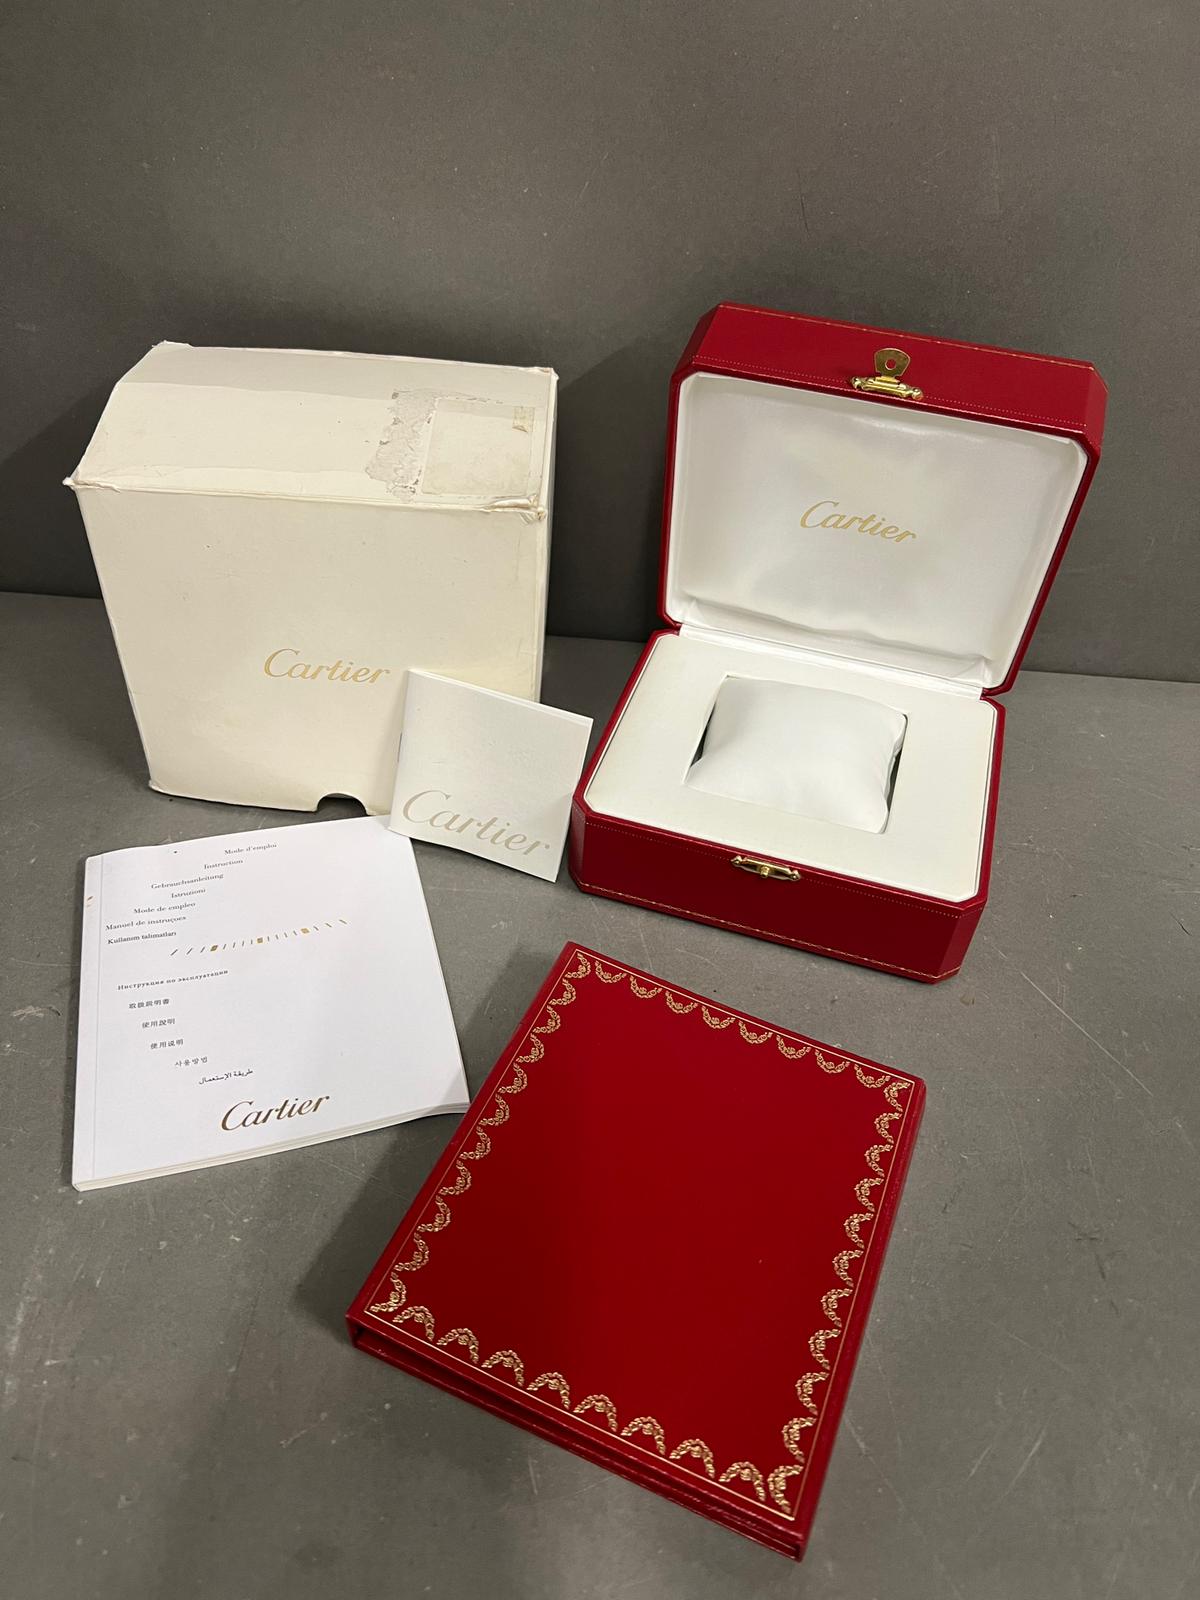 A Cartier watch box with booklet, cd and outer box - Image 3 of 4